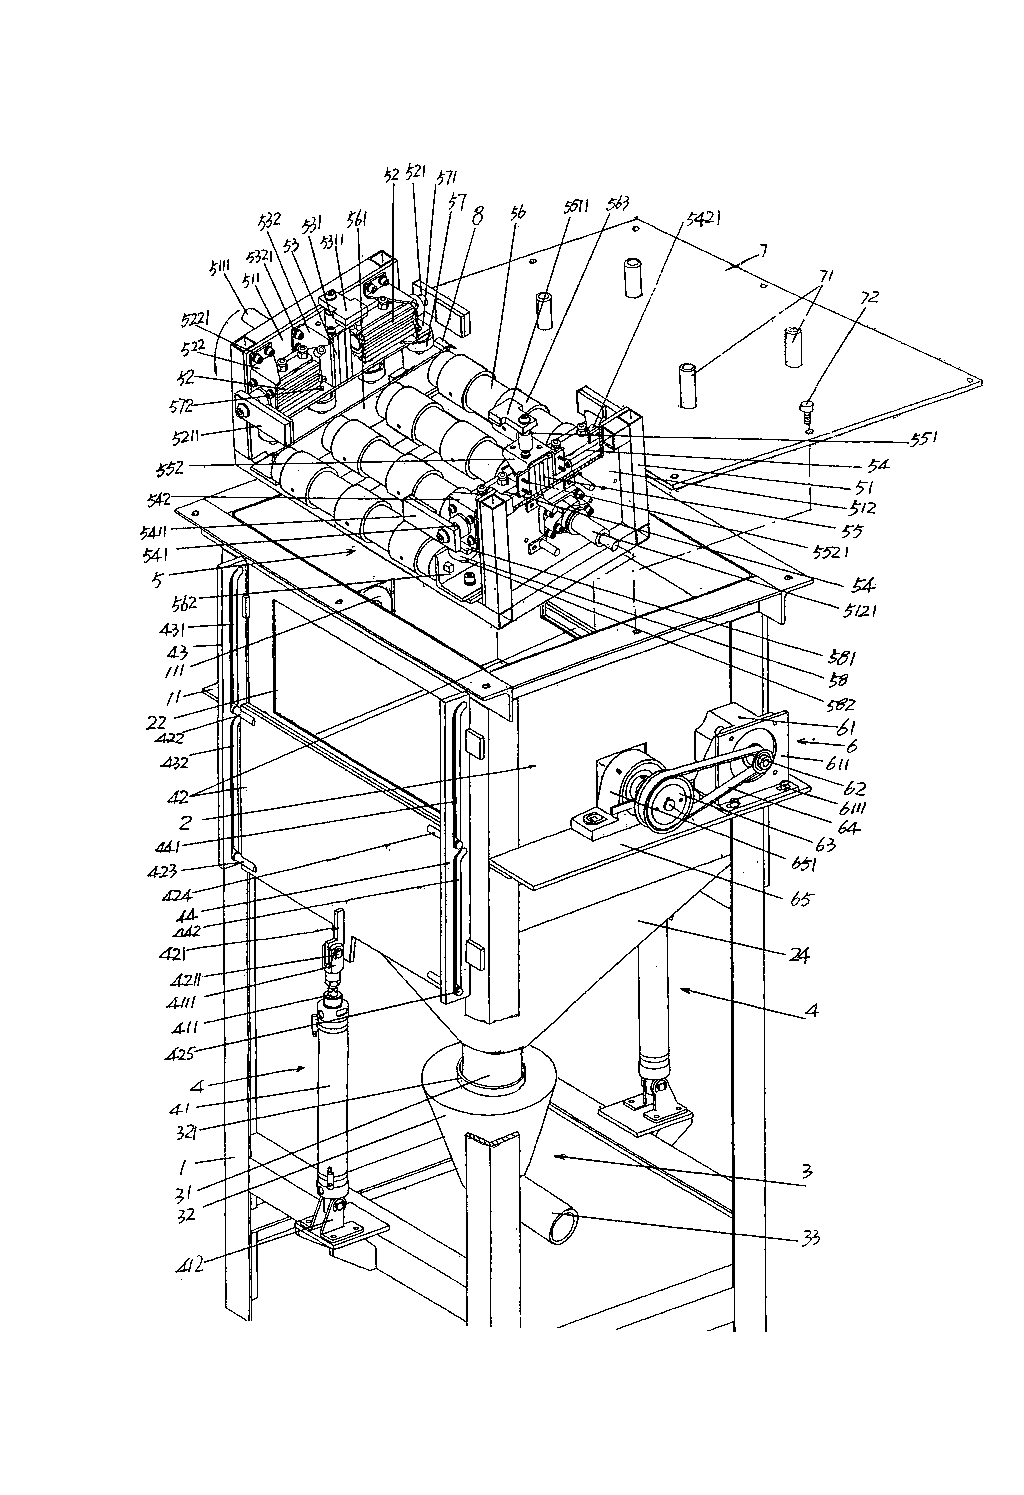 Automatic crucible dumping and cleaning system for electronic kilns